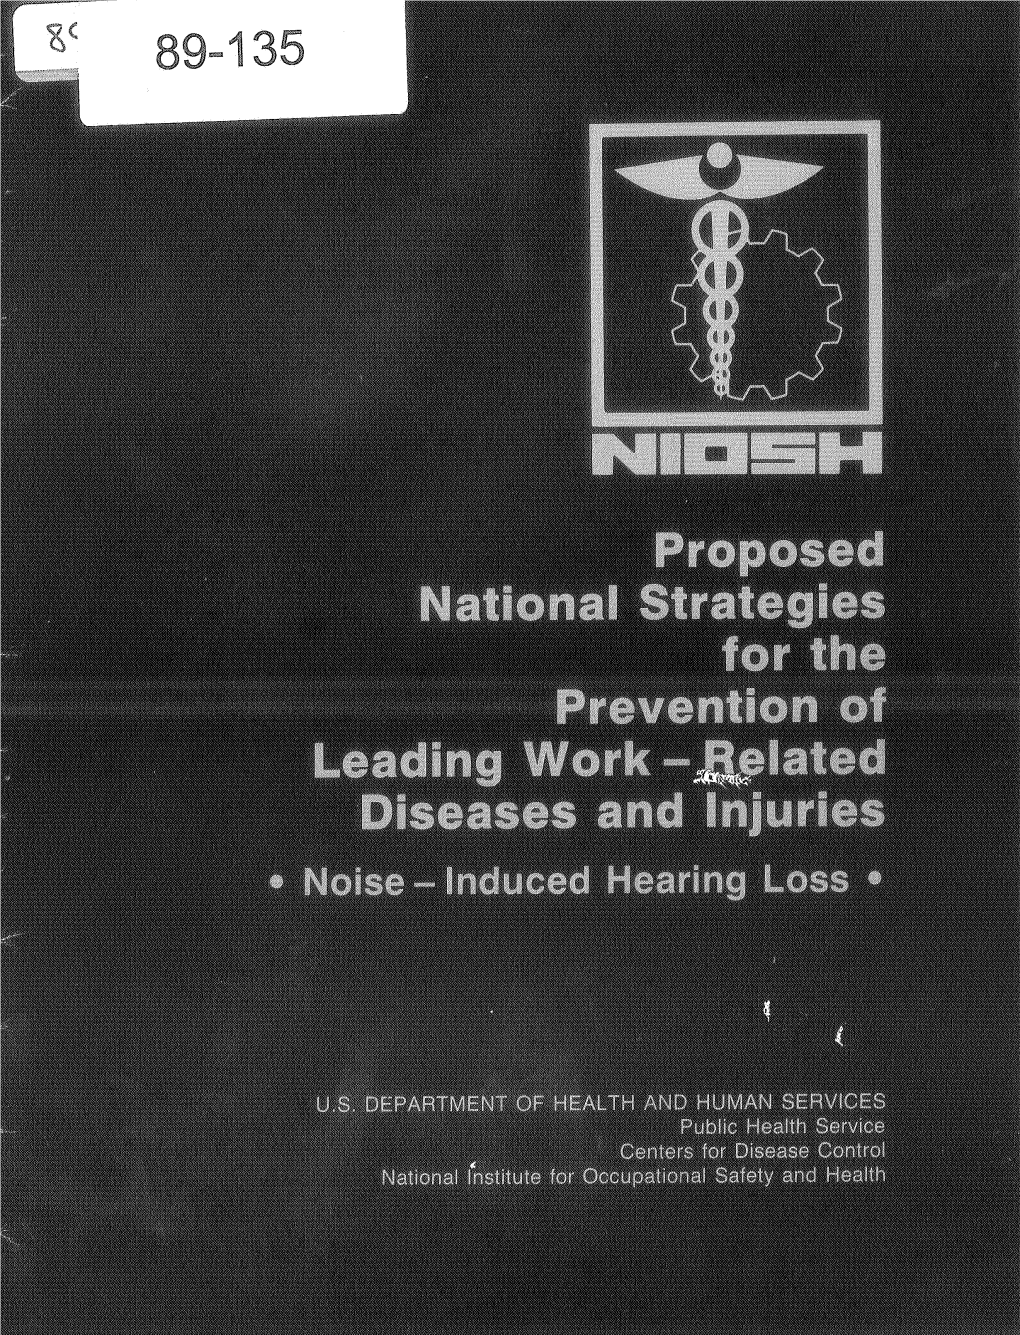 Proposed Nationa Strategy for the Prevention of Noise - Nduced Hearing Loss